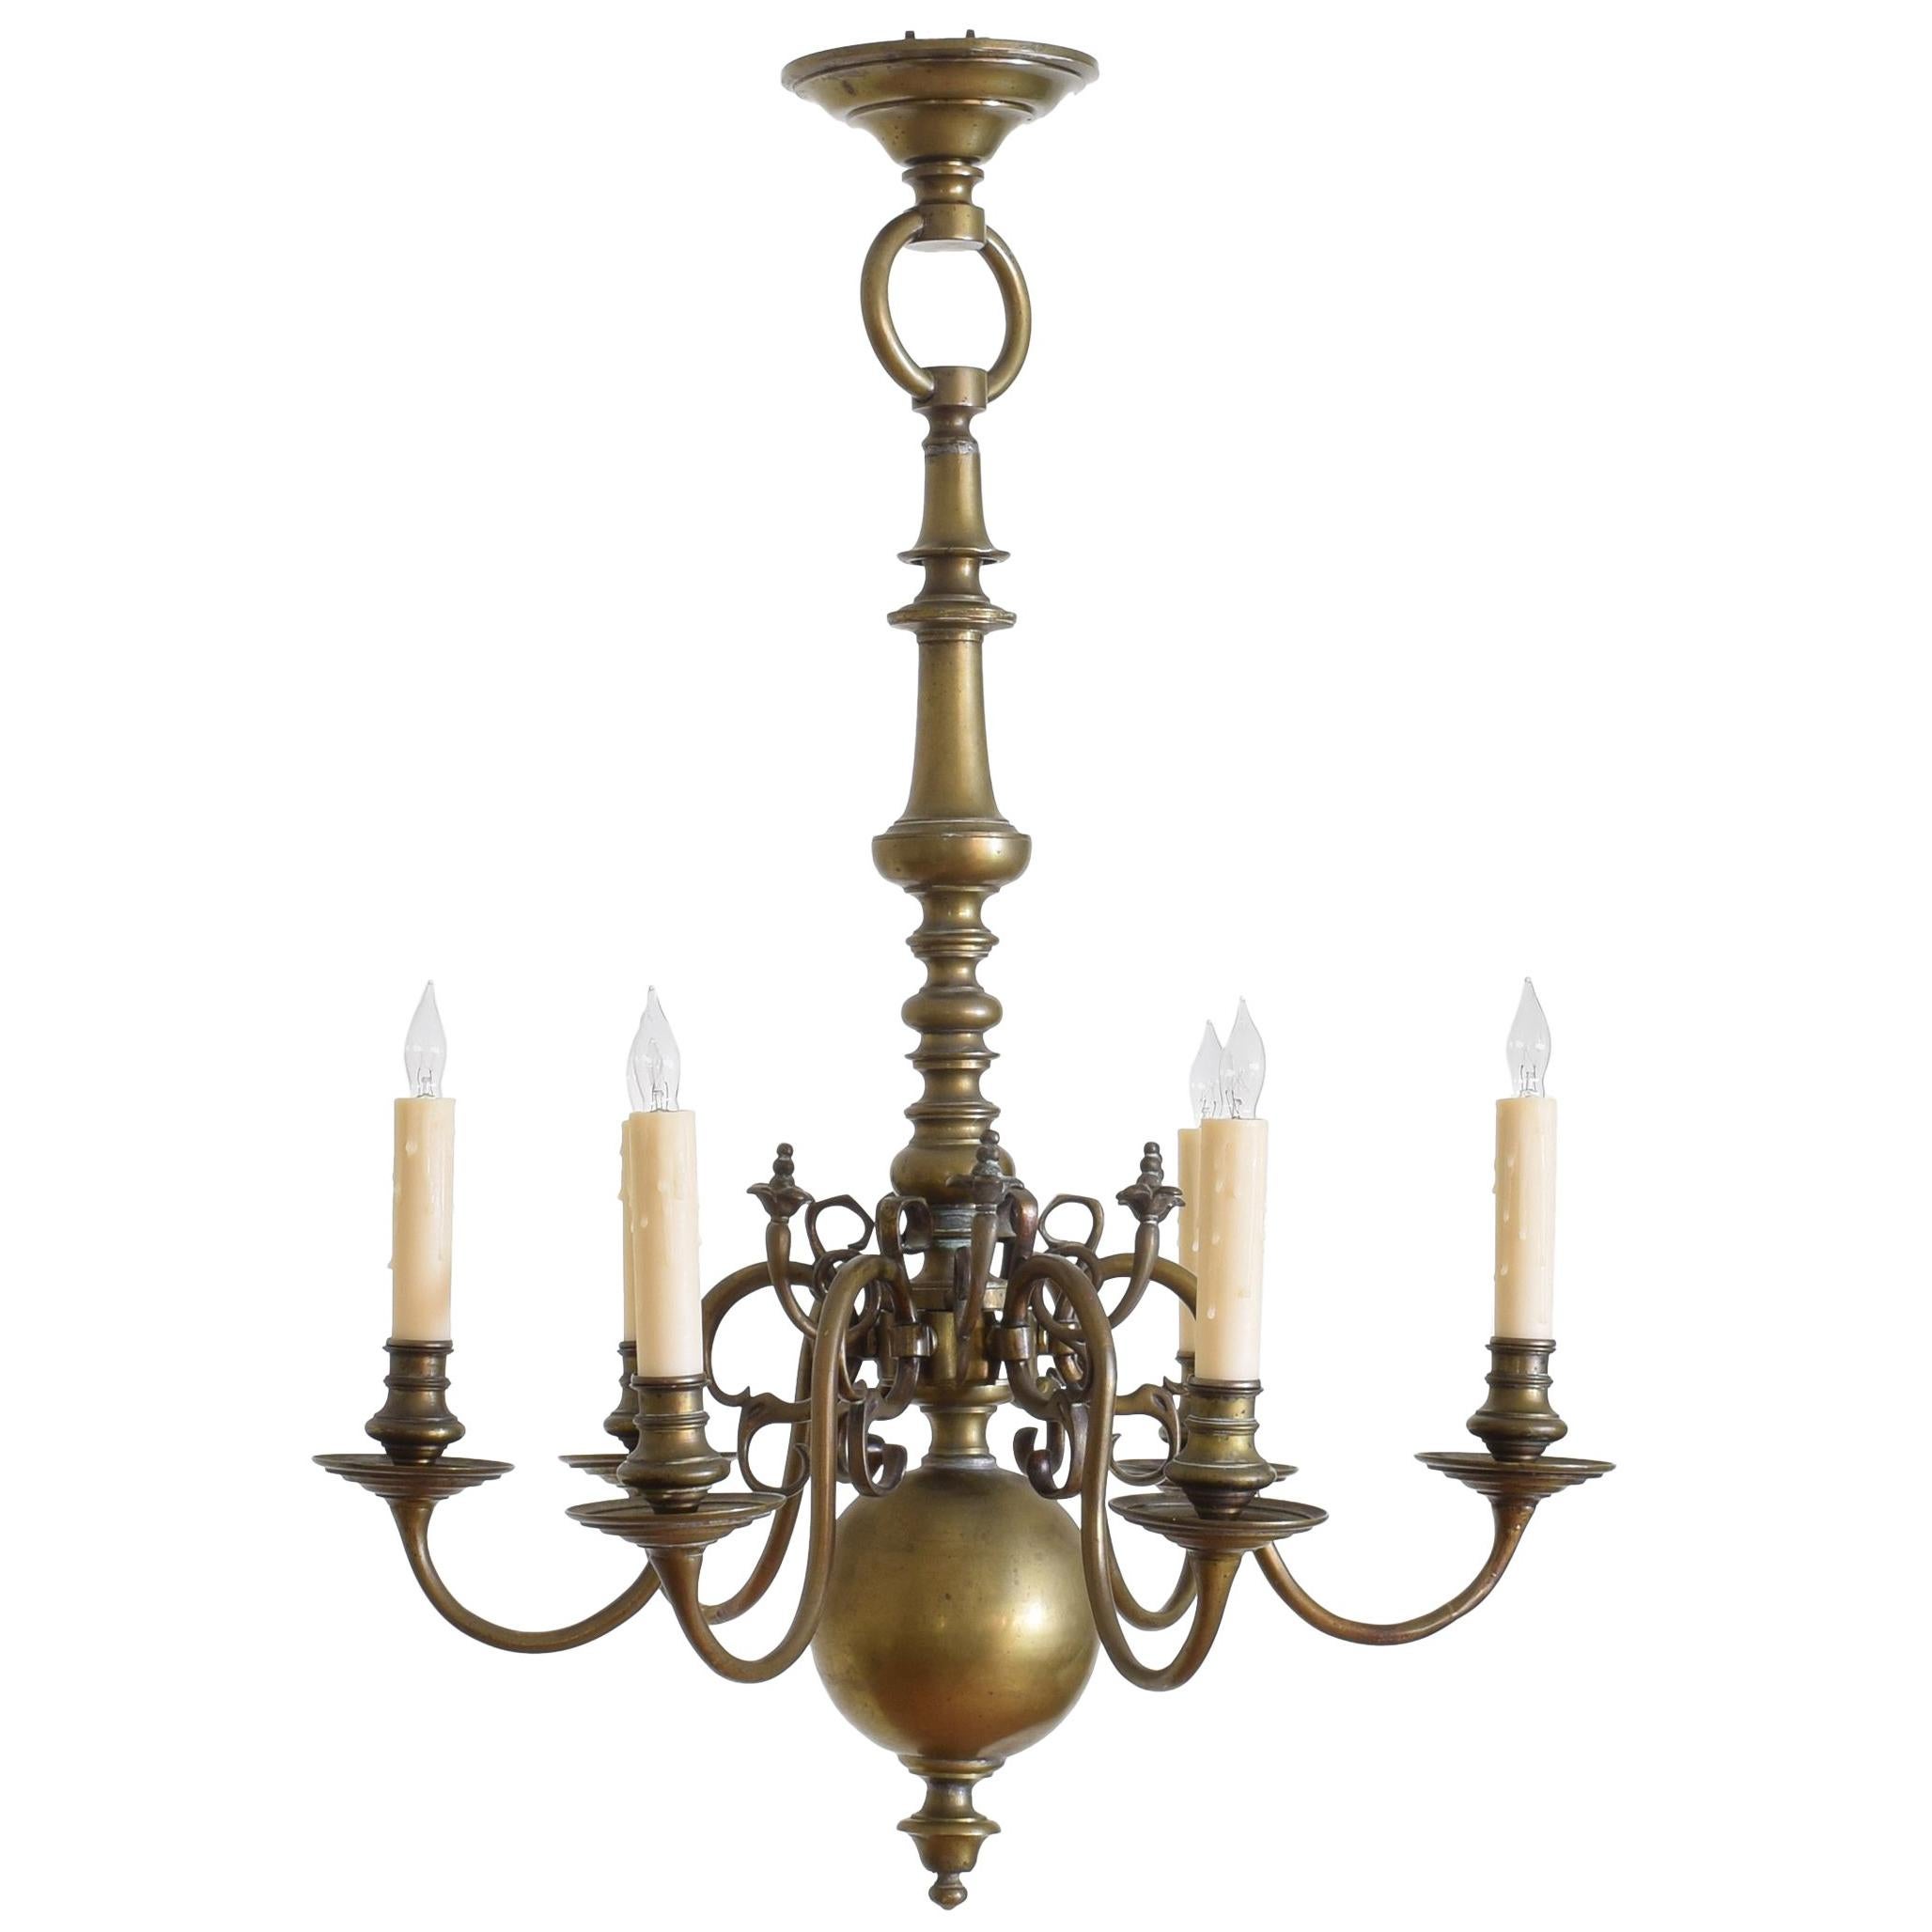 Dutch Baroque Style Patinated Brass 6-Light Chandelier, Late 19th Century